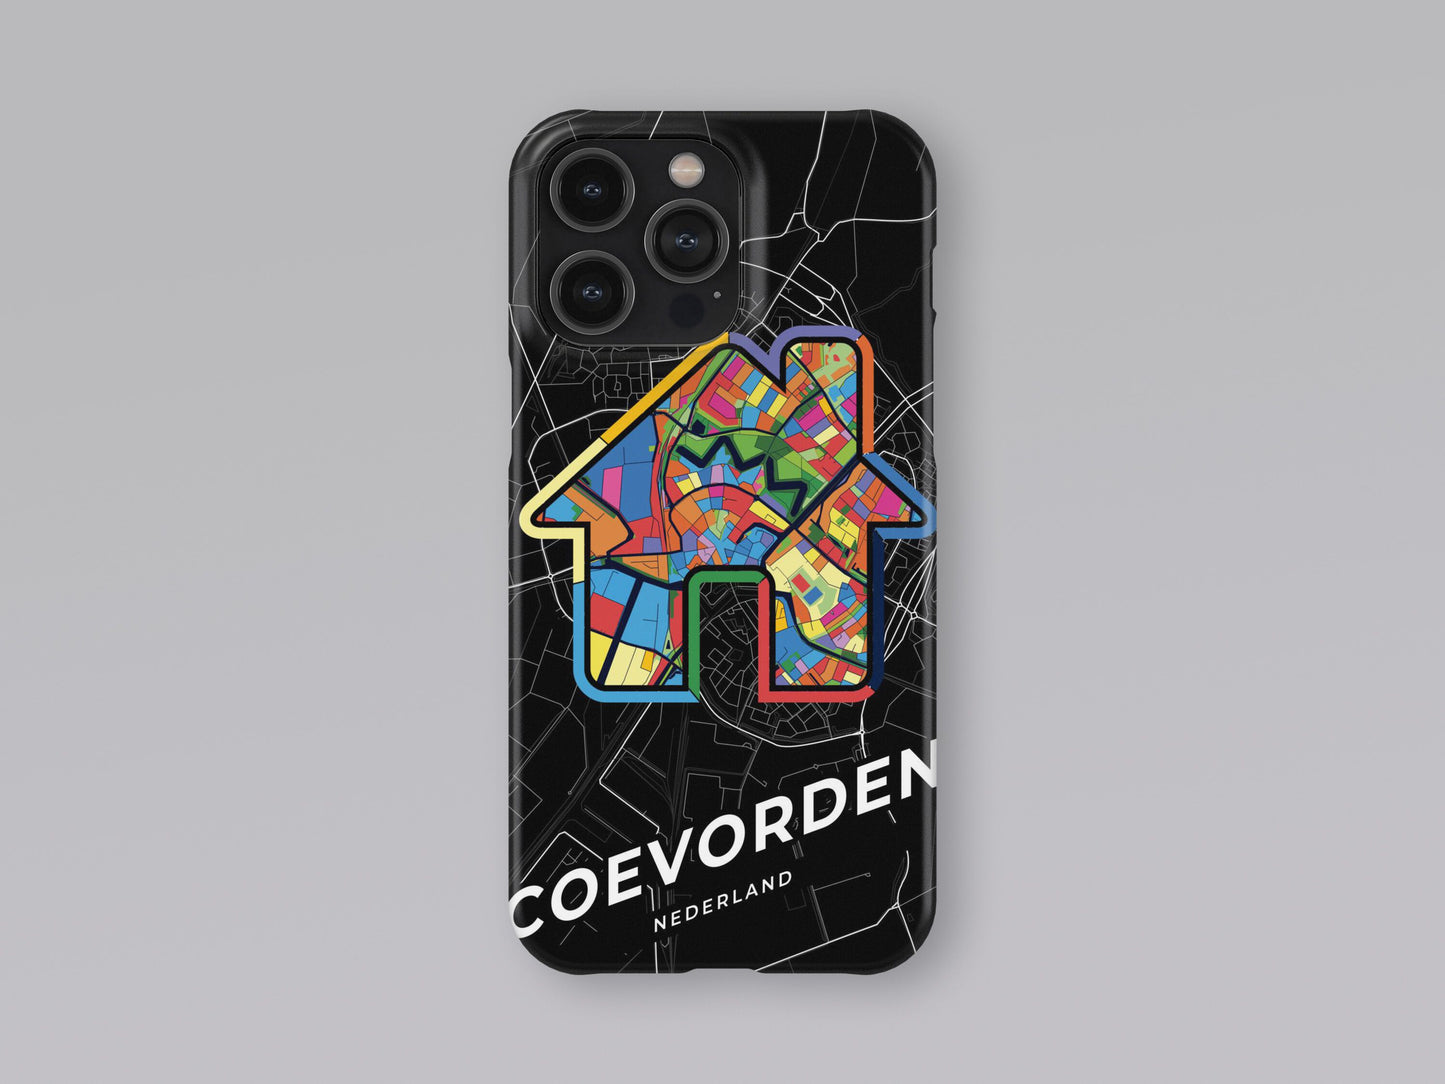 Coevorden Netherlands slim phone case with colorful icon. Birthday, wedding or housewarming gift. Couple match cases. 3